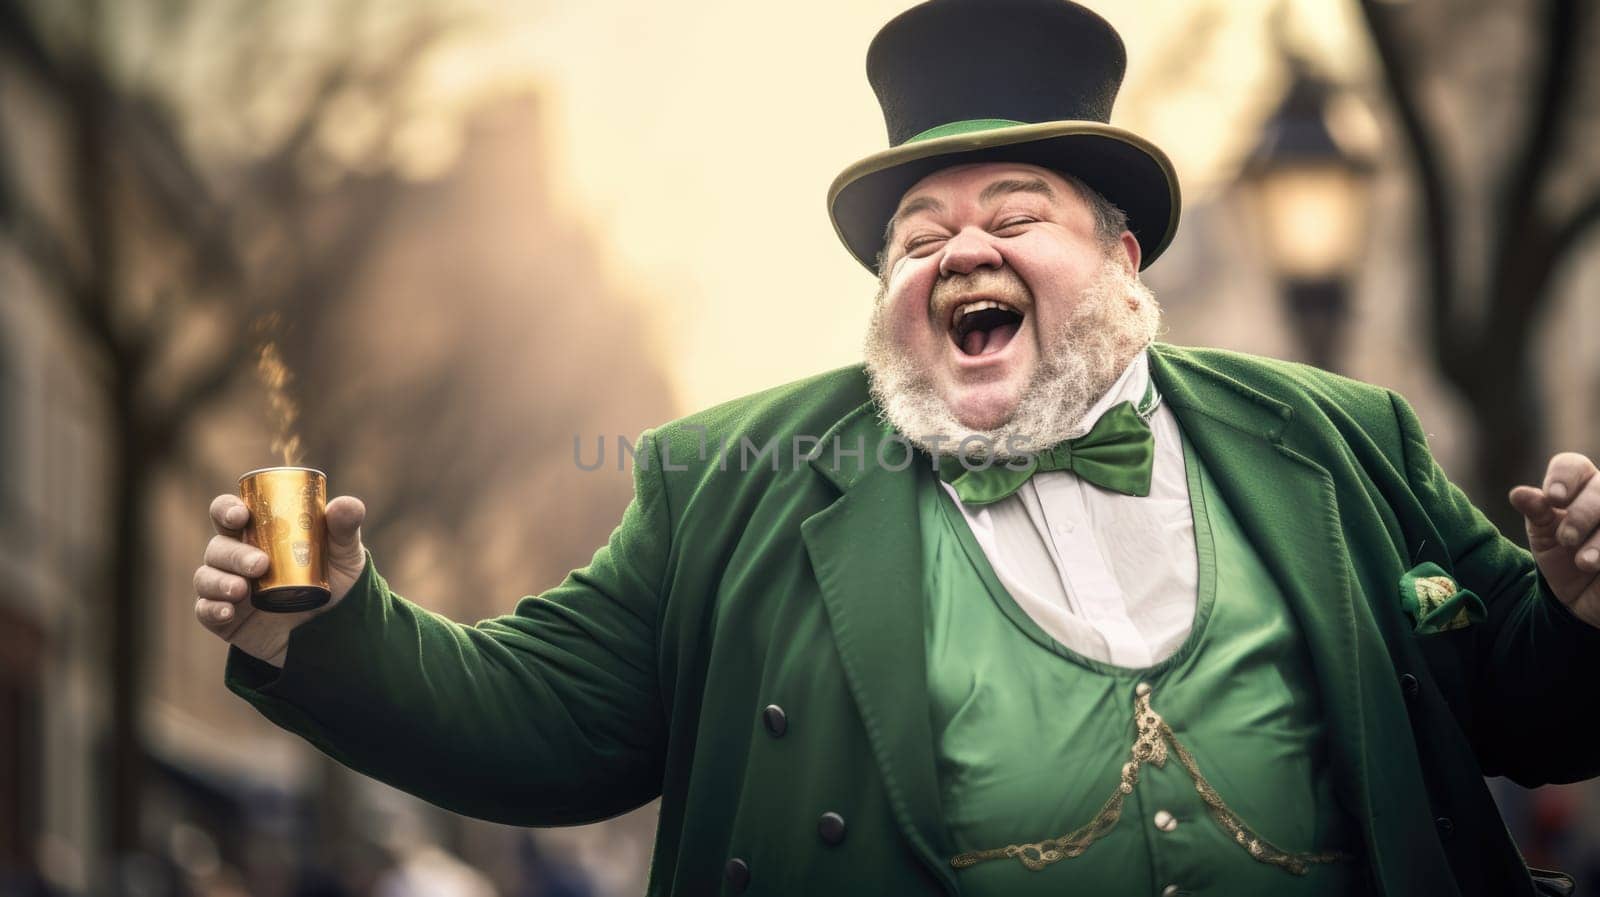 Happy St Patricks Day An Irishman in a green suit and hat is laughing. by JuliaDorian